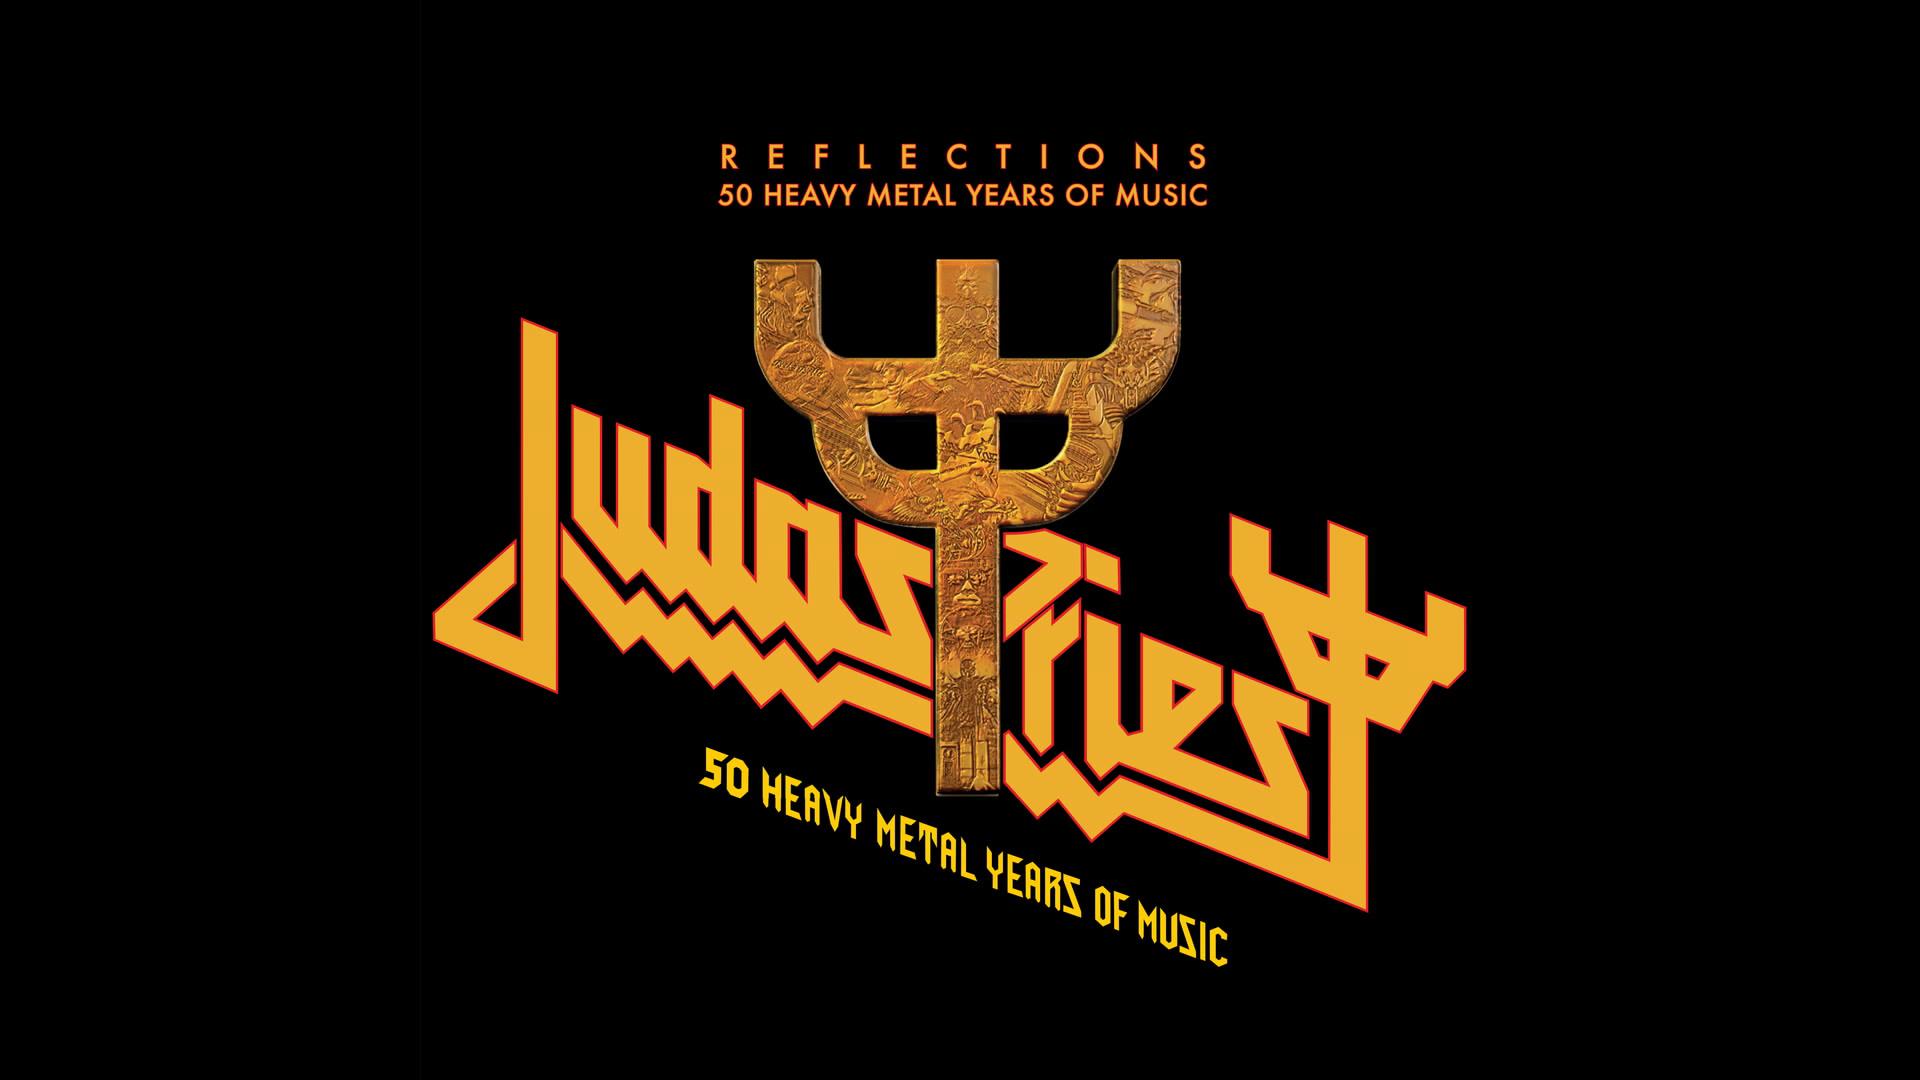 Judas Priest - Victim of Changes (Live at the Agora Theatre, Cleveland, 1978 - Official Audio)